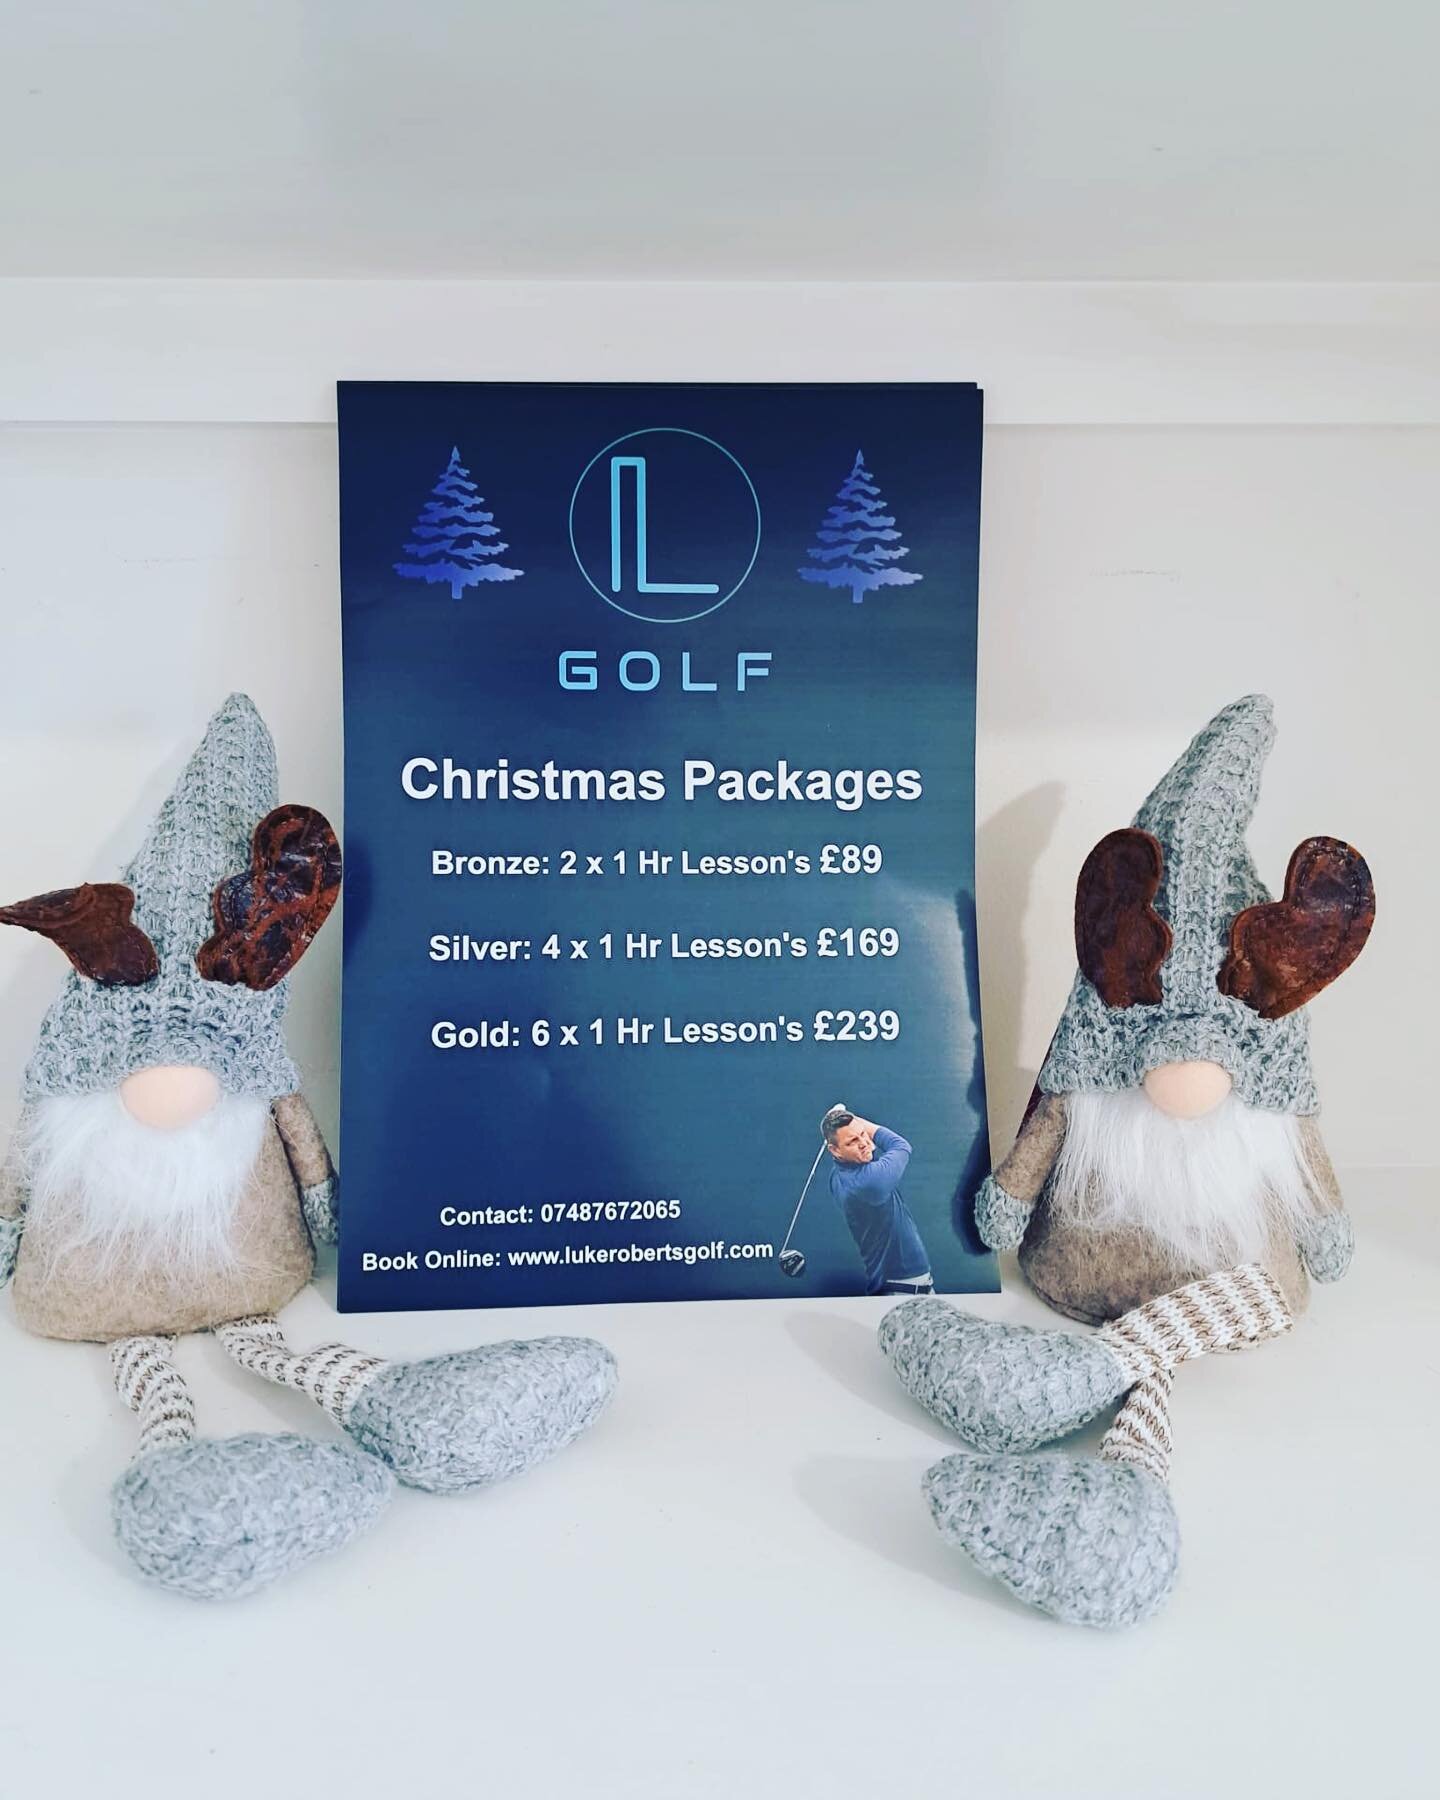 🎄Christmas is upon us! So why not give the gift of Golf this year!!🎄#golflessons #golfinwgc #begginersgolf #learntoplaygolf #theclubatmillgreen #biggleswadebusiness #golfinbiggleswade #christmasgifts #christmasideas #golfforchristmas #getgolfing #g